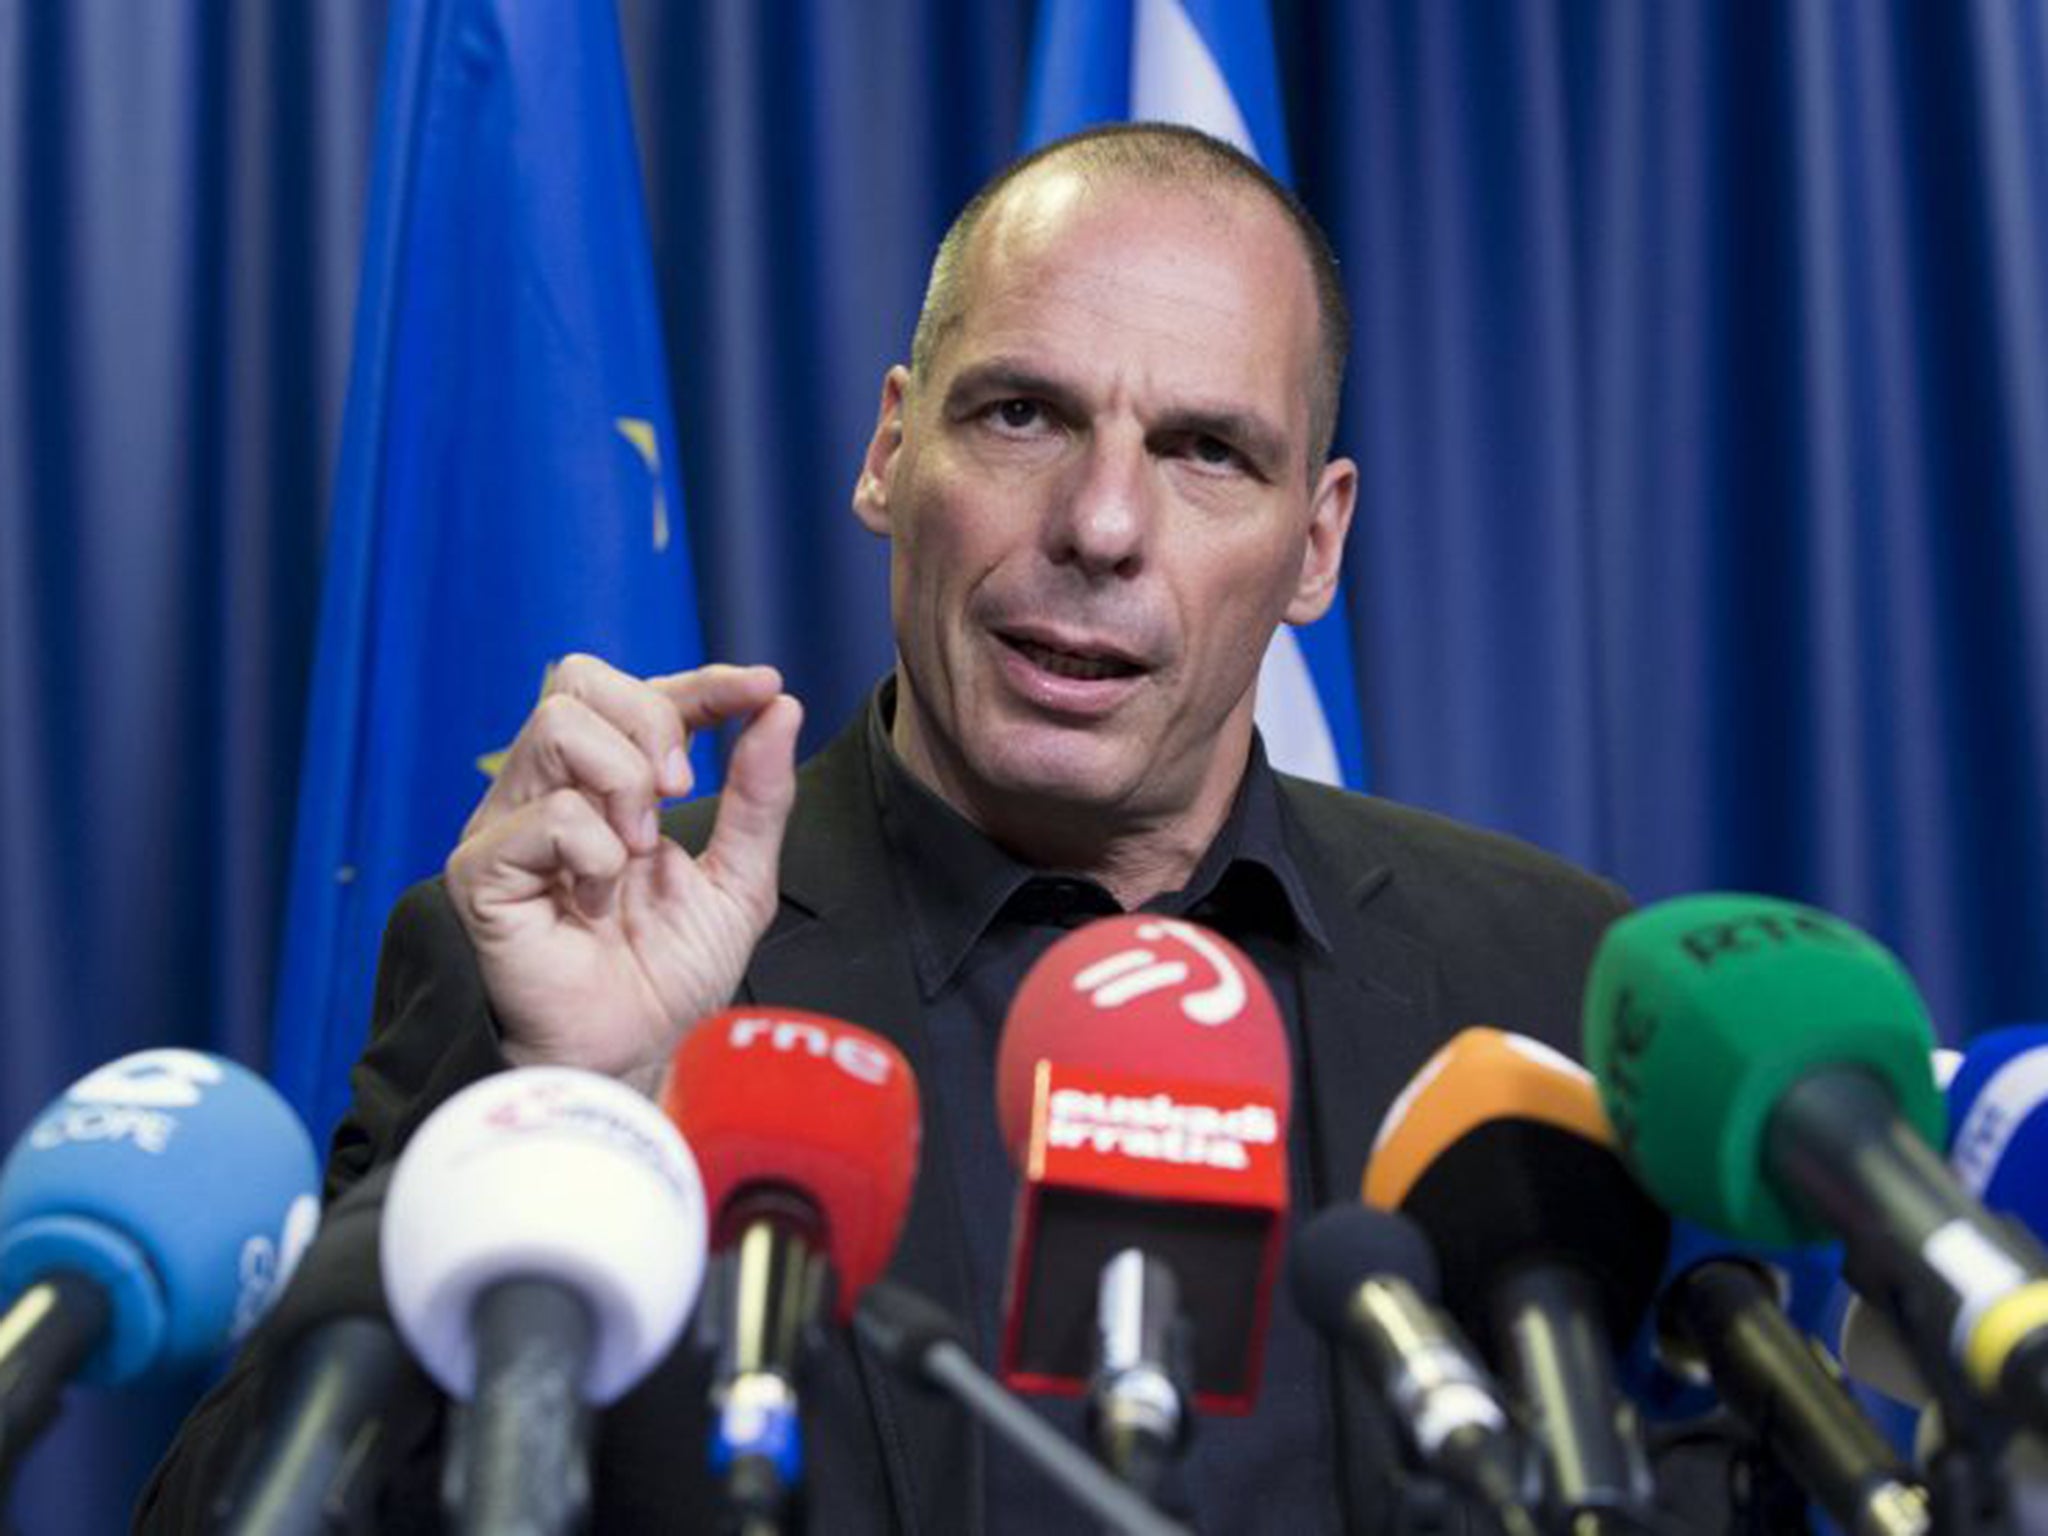 "The Greek government will make use of all our legal rights," said Greek finance minister Yanis Varoufakis